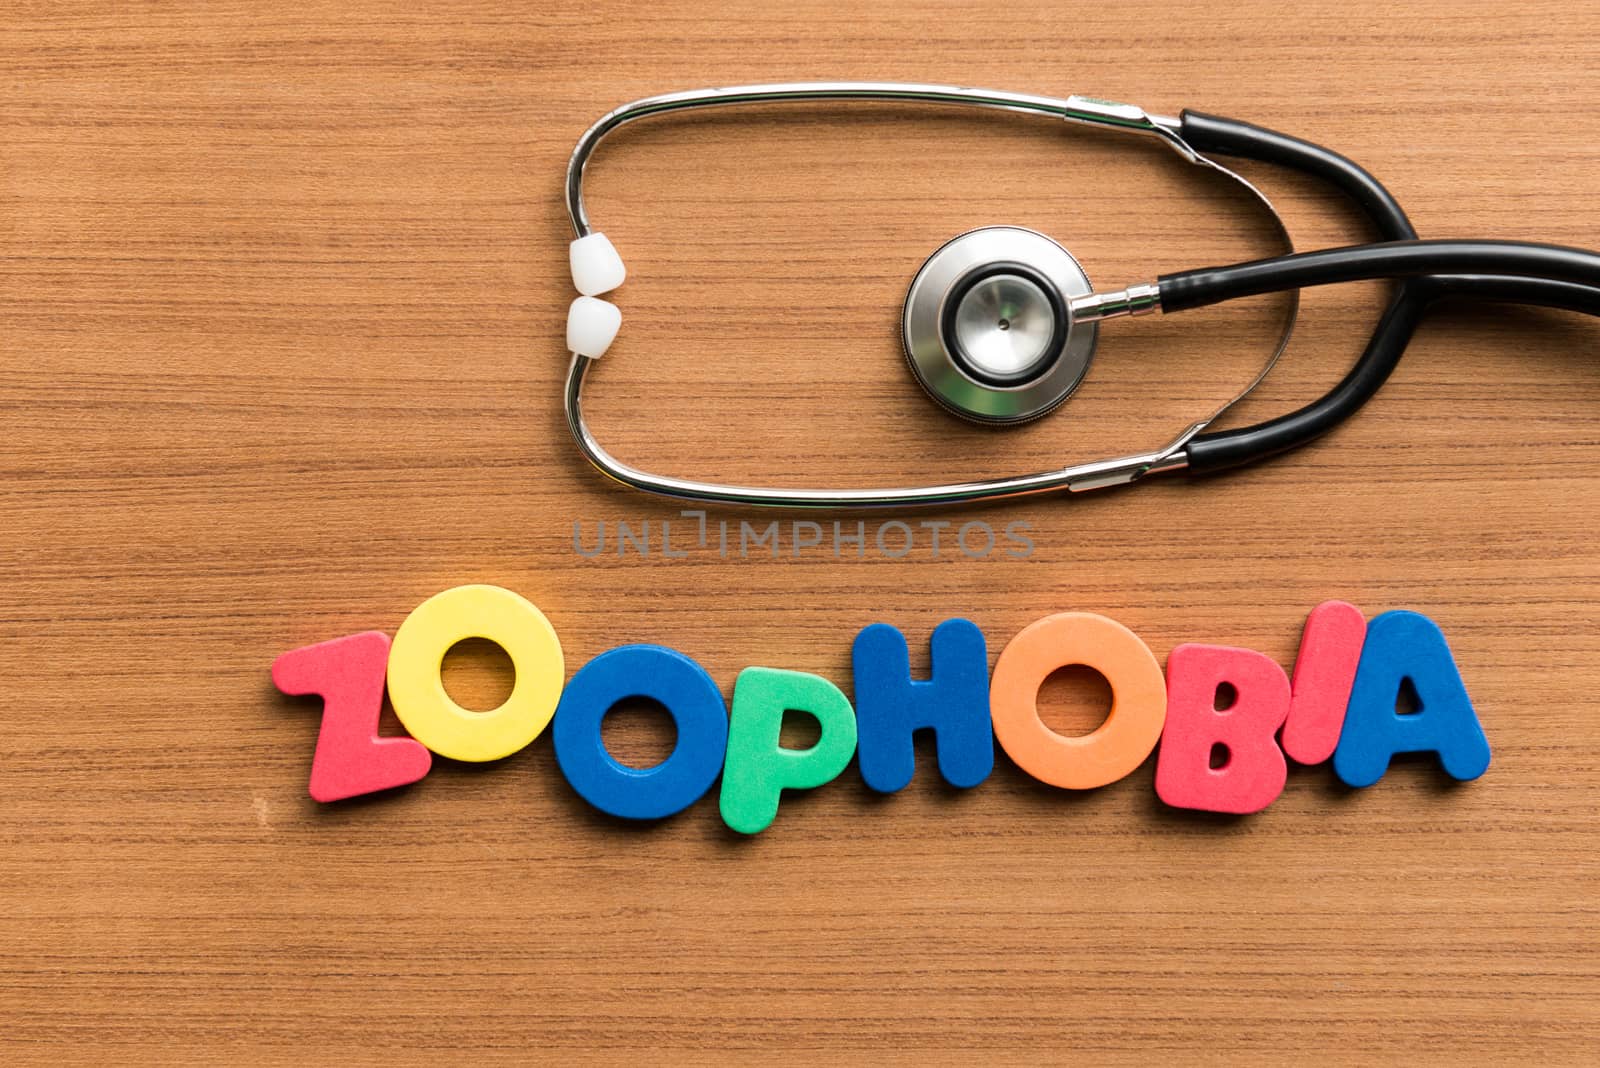 zoophobia colorful word with stethoscope by sohel.parvez@hotmail.com